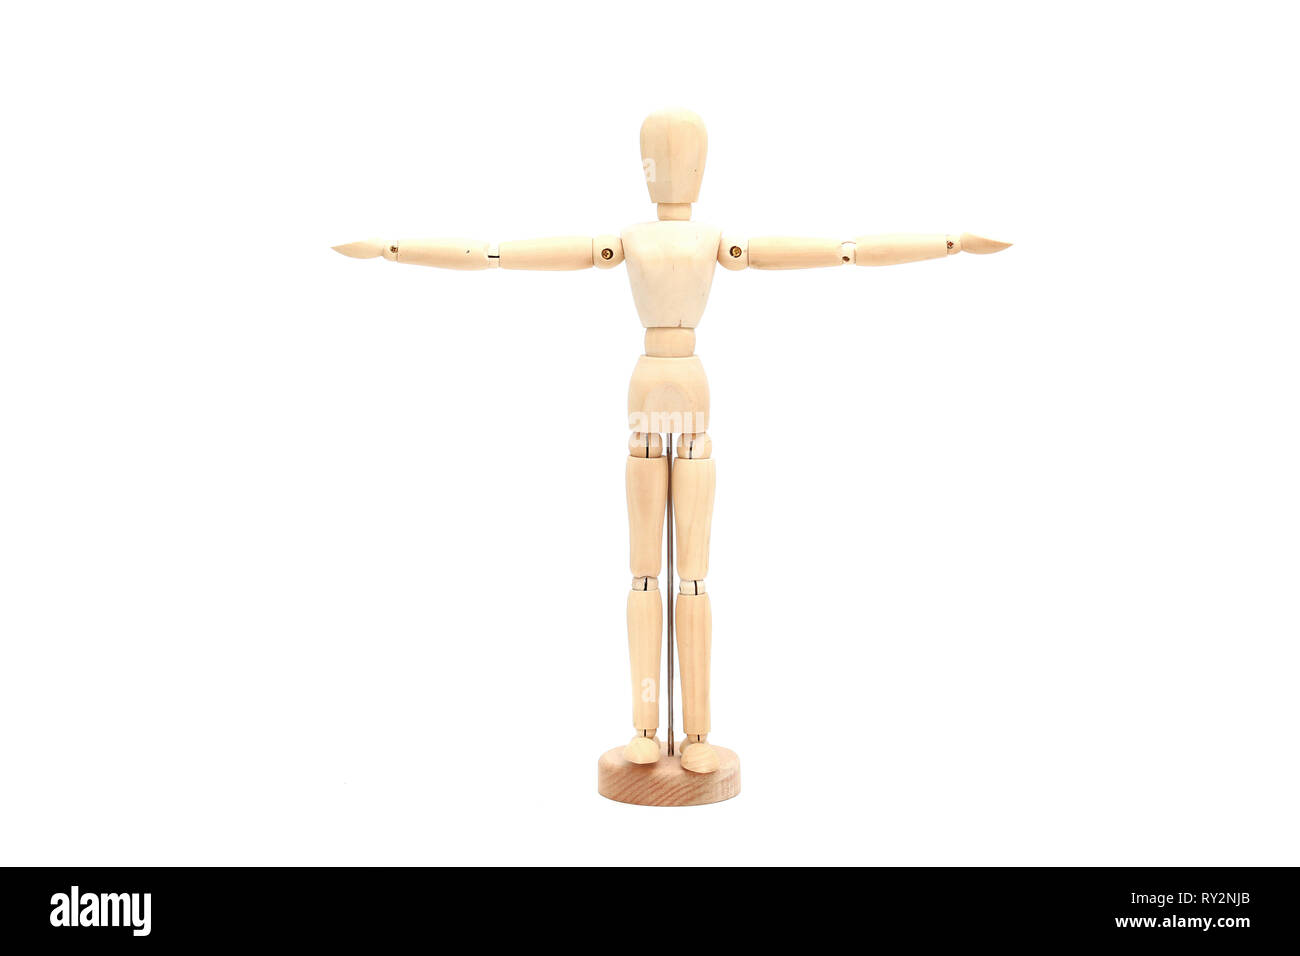 Wooden Mannequin, For Drawing And Character's Pose Reference